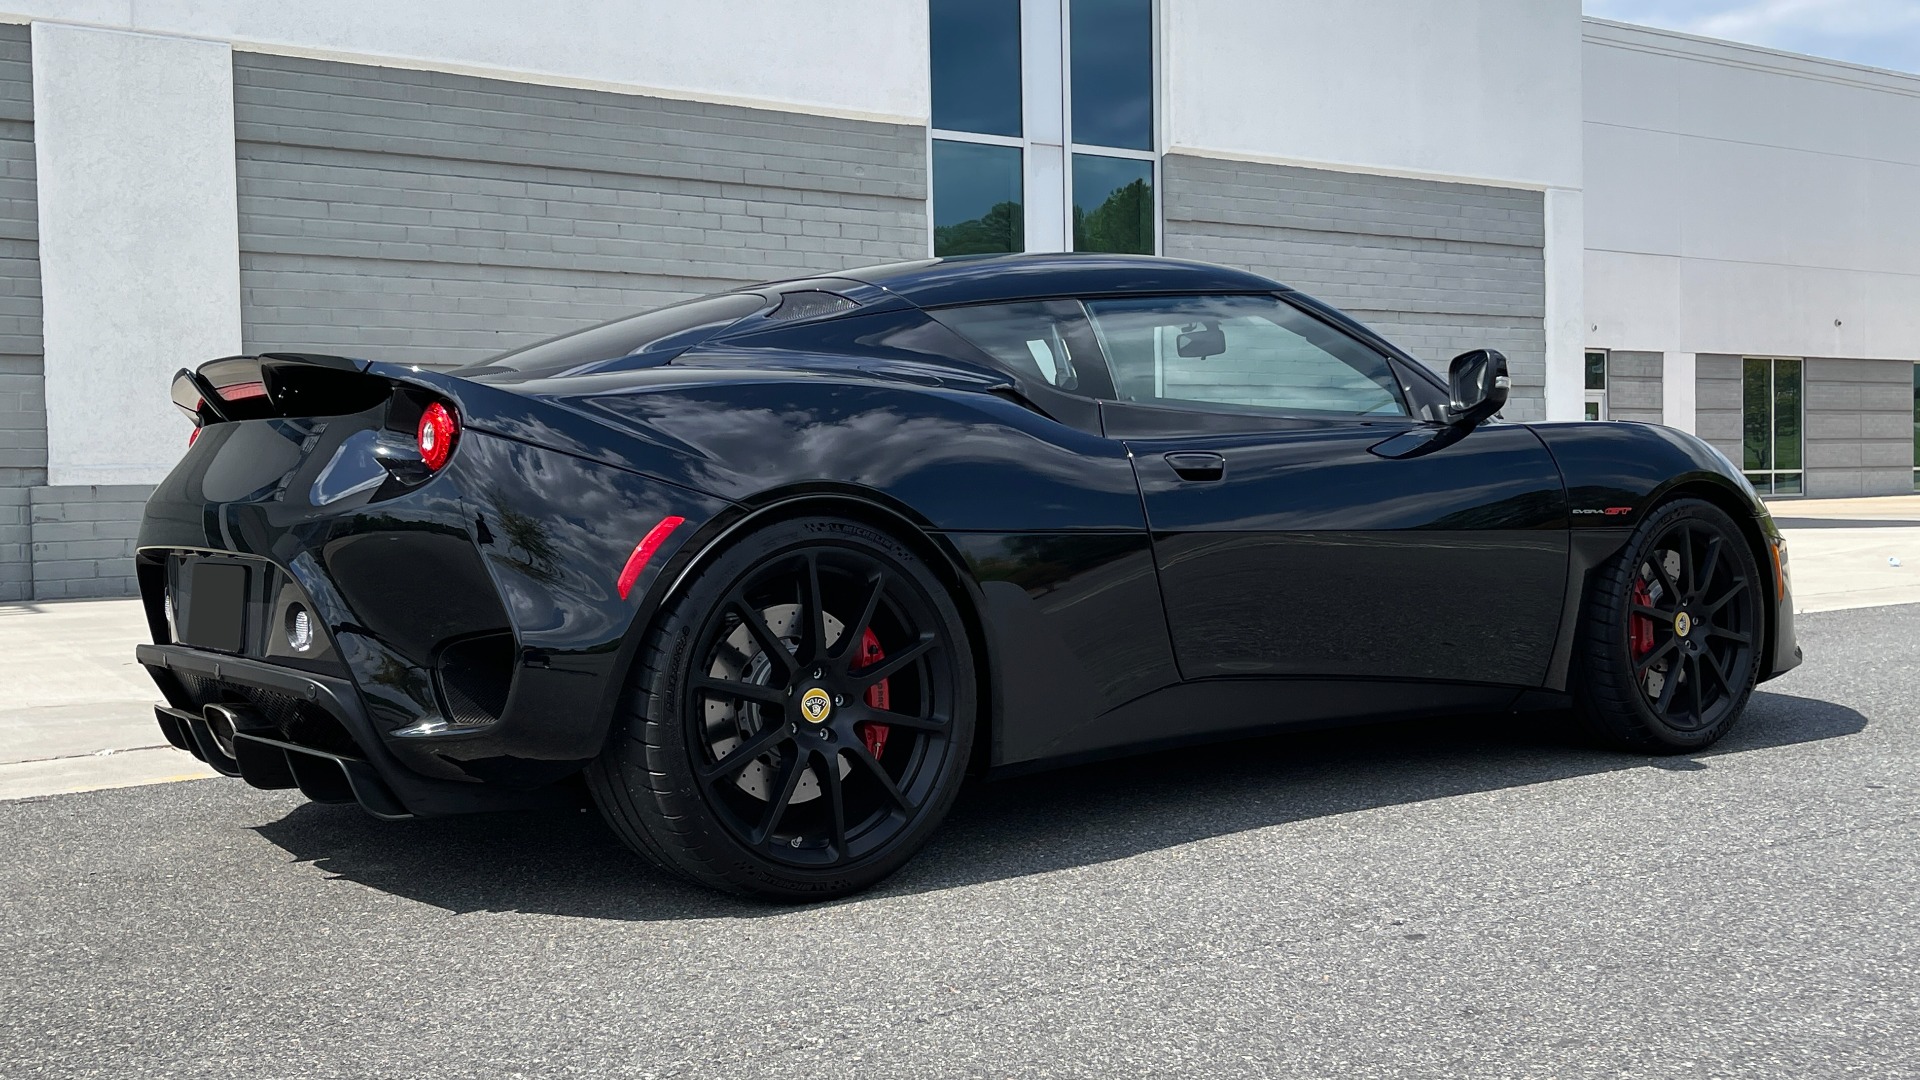 Used 2020 Lotus EVORA GT COUPE / 3.5L SC / NAV / ALPINE SND W/SUBWOOFER / REARVIEW for sale $102,895 at Formula Imports in Charlotte NC 28227 2